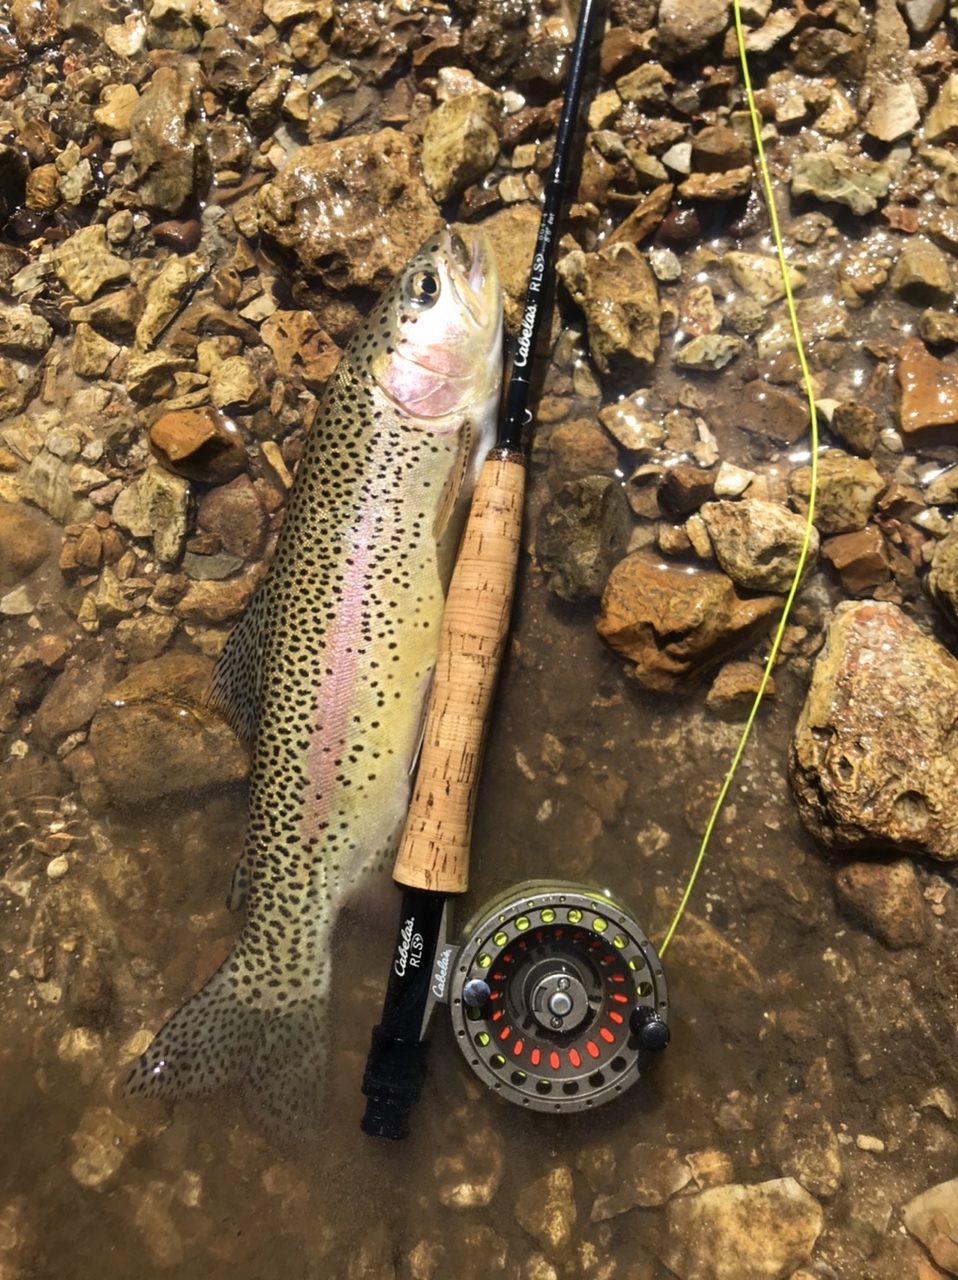 Wild rainbow trout caught from Missouri blue ribbon trout stream measured against a Cabela’s fly rod on the stream bank